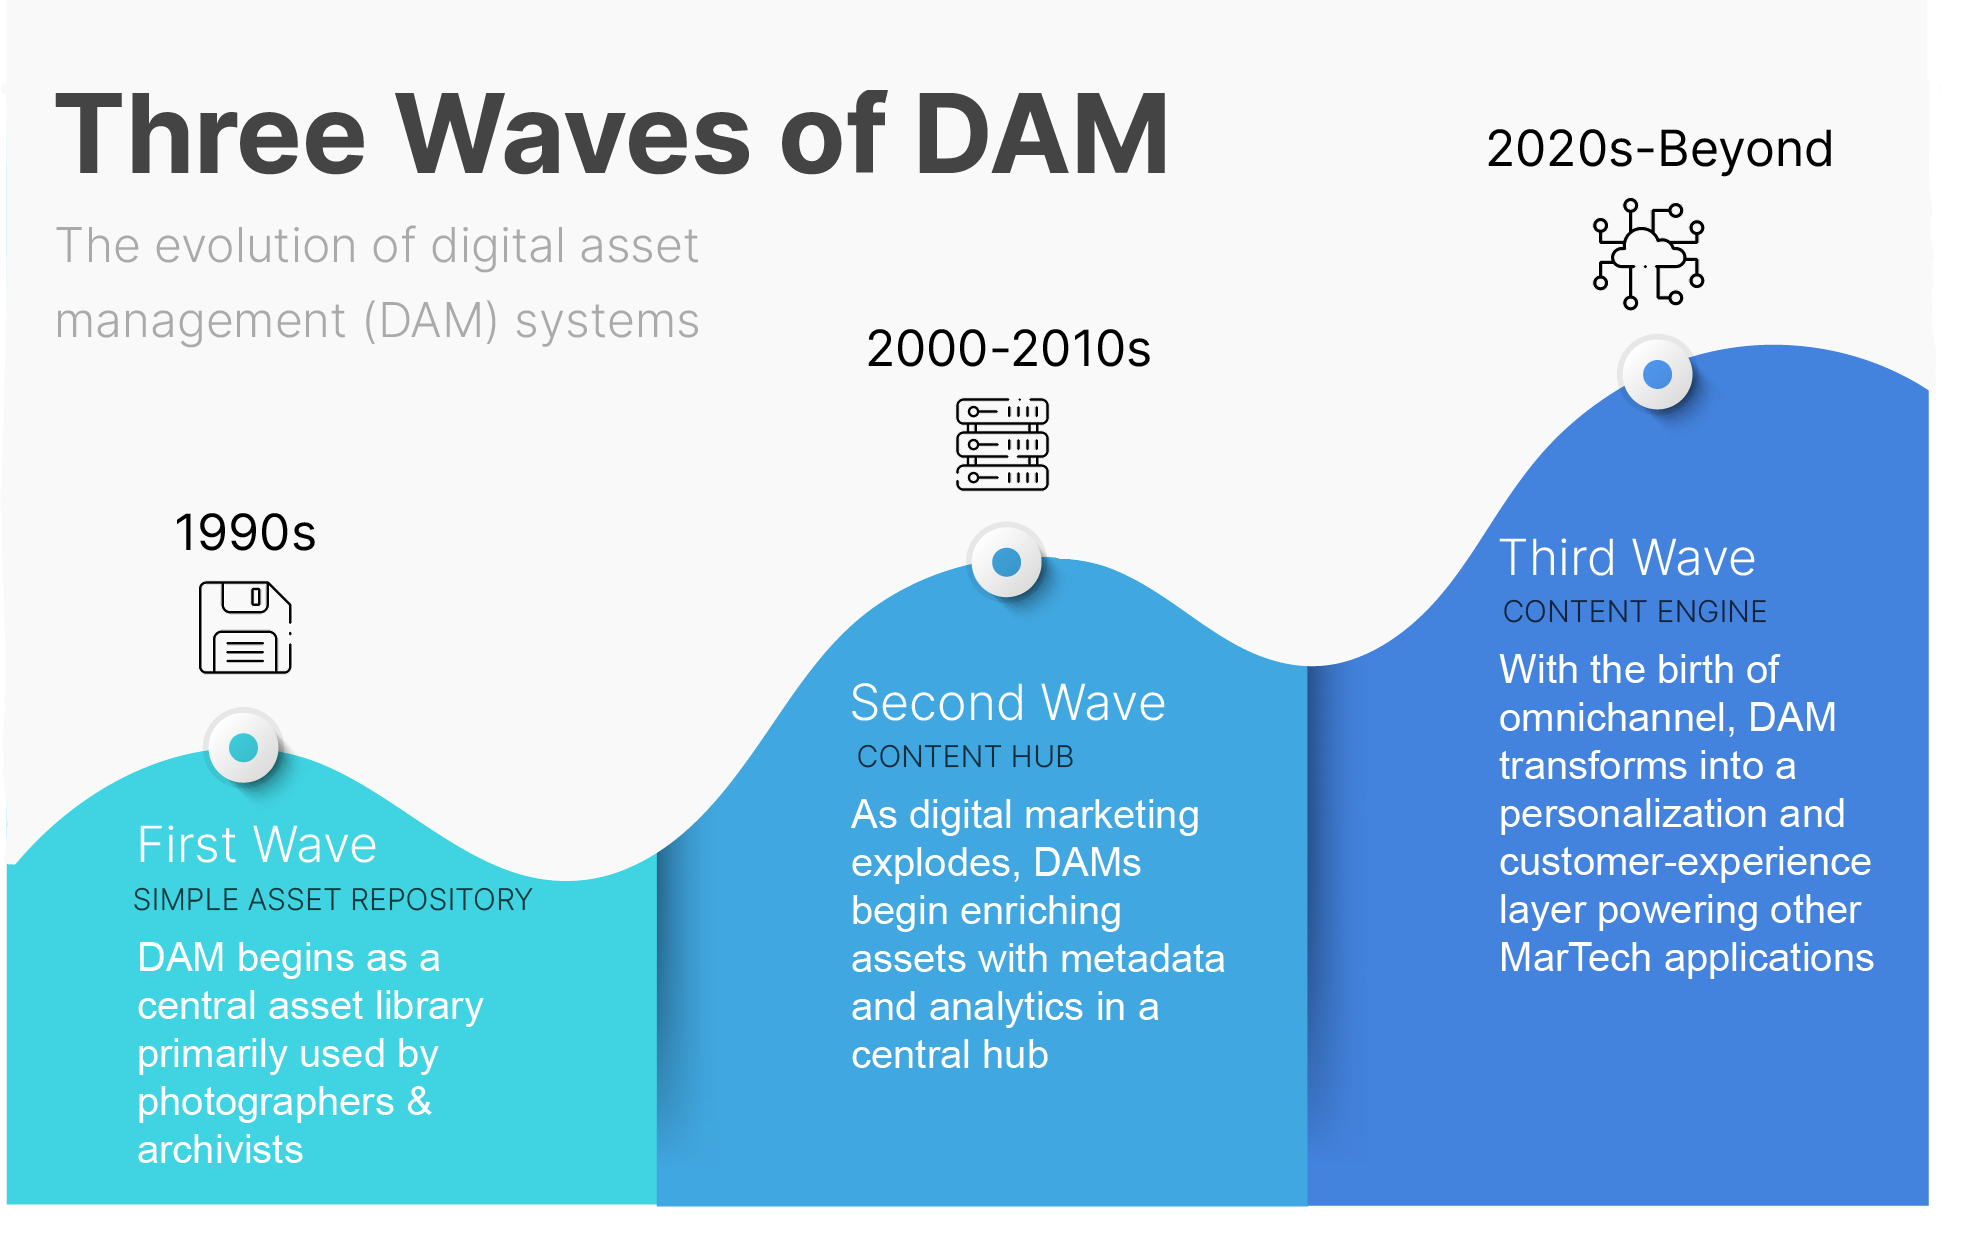 3 Waves of DAM Infographic. First Wave = Simple Asset Repository; Second Wave = Content Hub; Third Wave = Content Engine